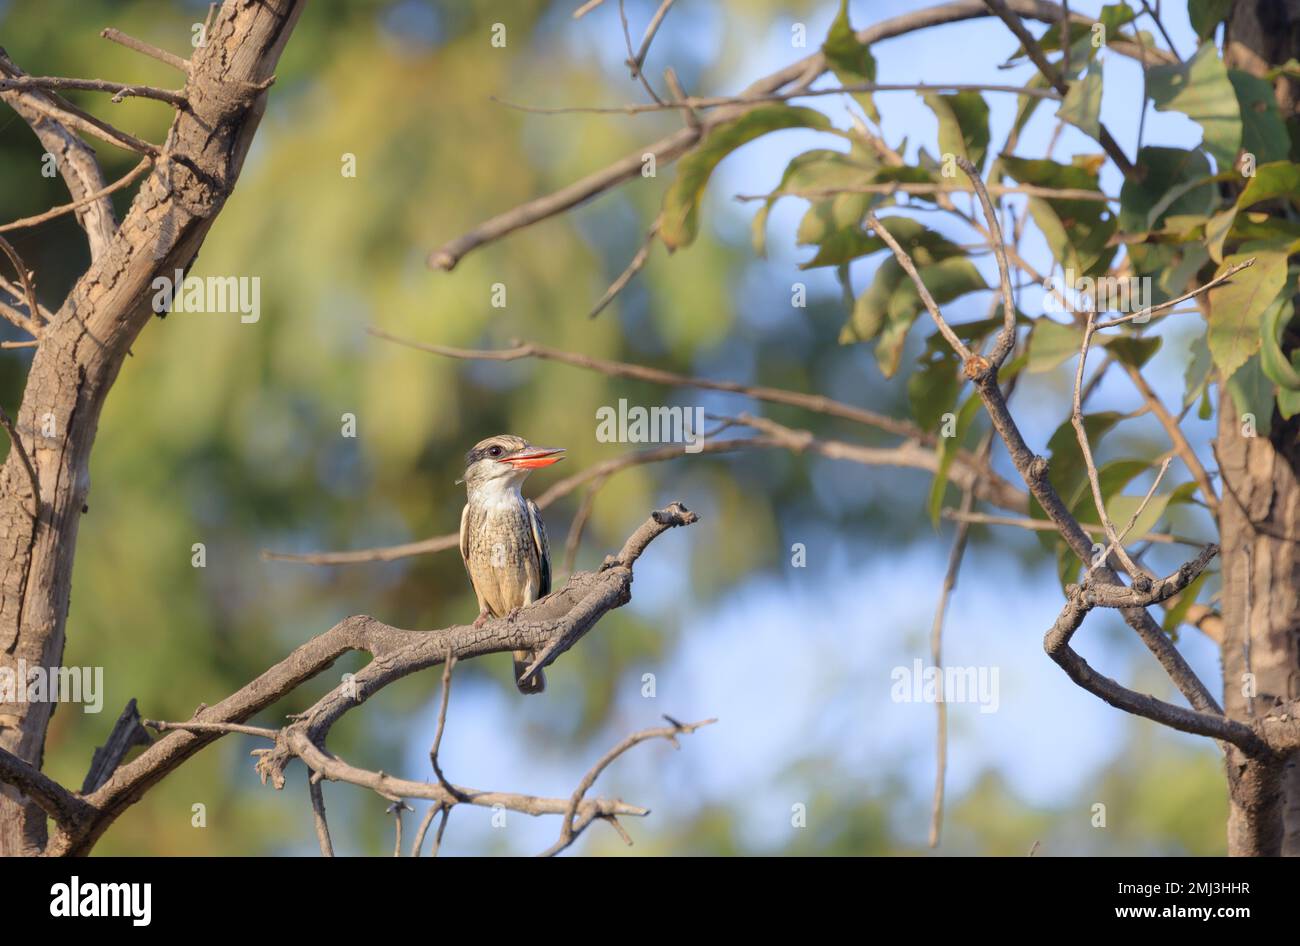 Striped kingfisher (Halcyon chelicuti), perched on branch, Gambia, Africa Stock Photo